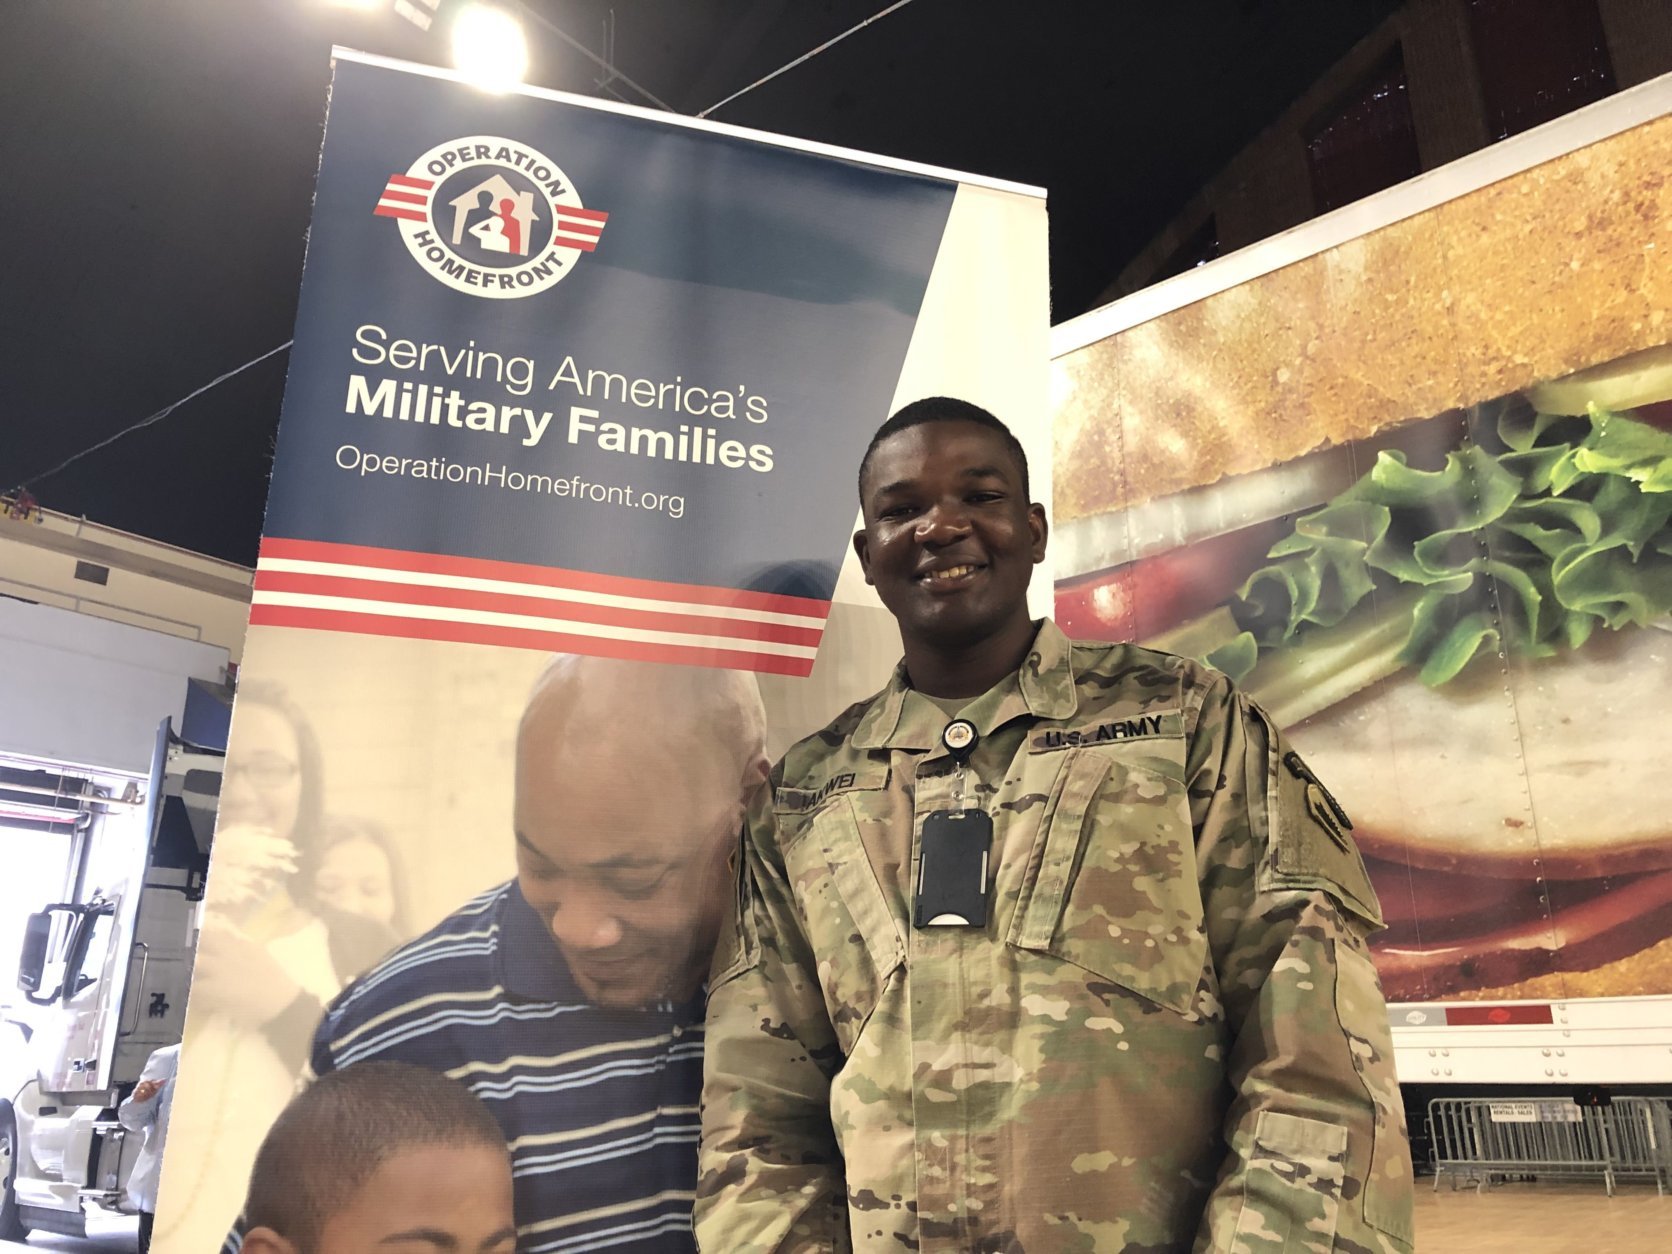 "We know that people really care about what we do," D.C. National Guard Spec. Emmil Akwei said of the event. "It's a very nice way that people really show their appreciation to us, so that's really good." (WTOP/Kristi King)